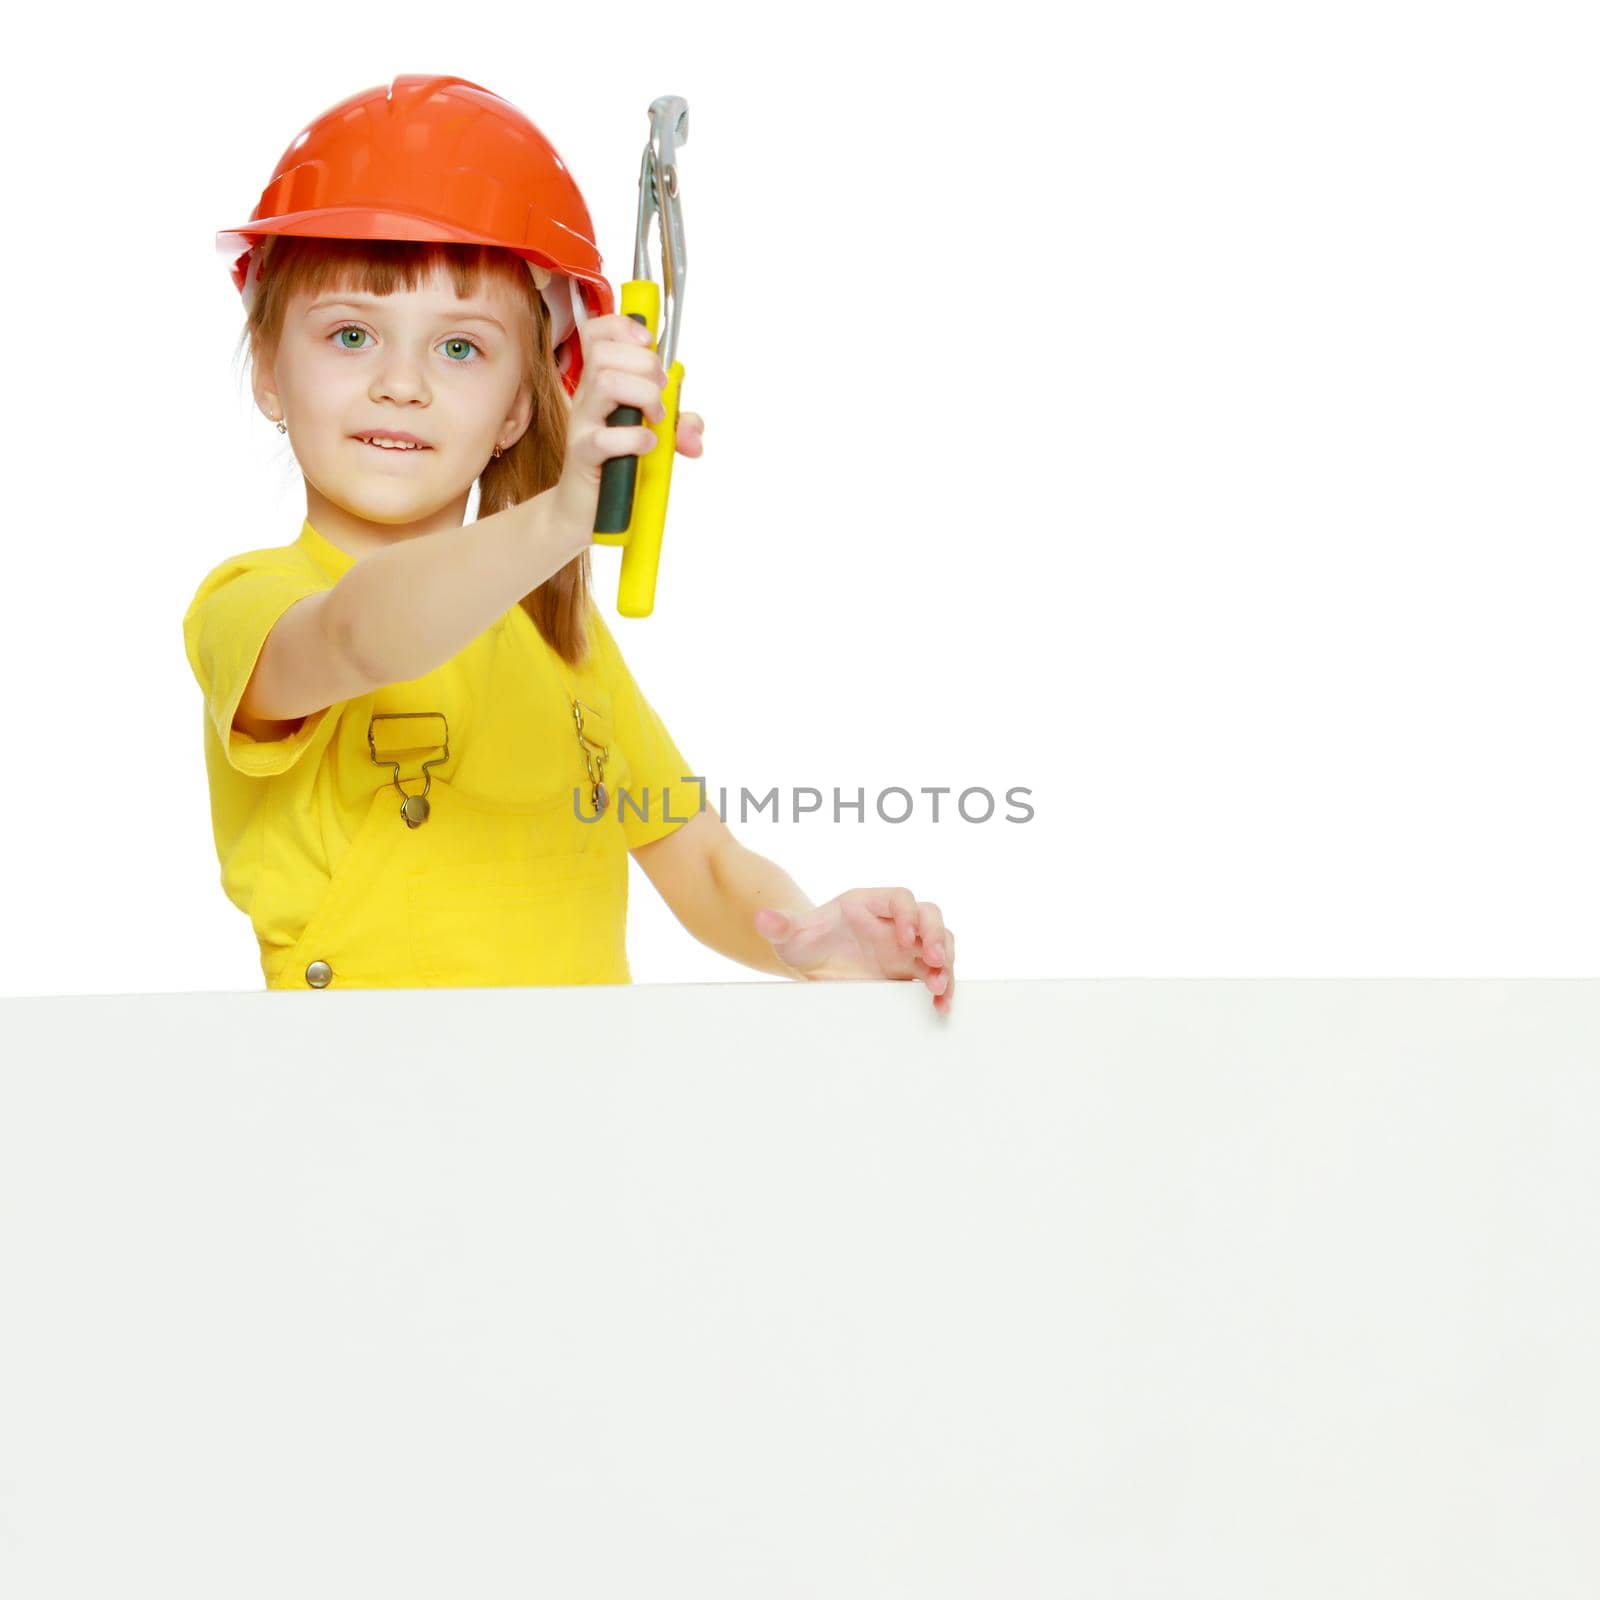 A nice little girl in a construction helmet and a yellow T-shirt peeped out from behind a white advertising banner.Girl in a construction helmet peeks out from behind a billboard.